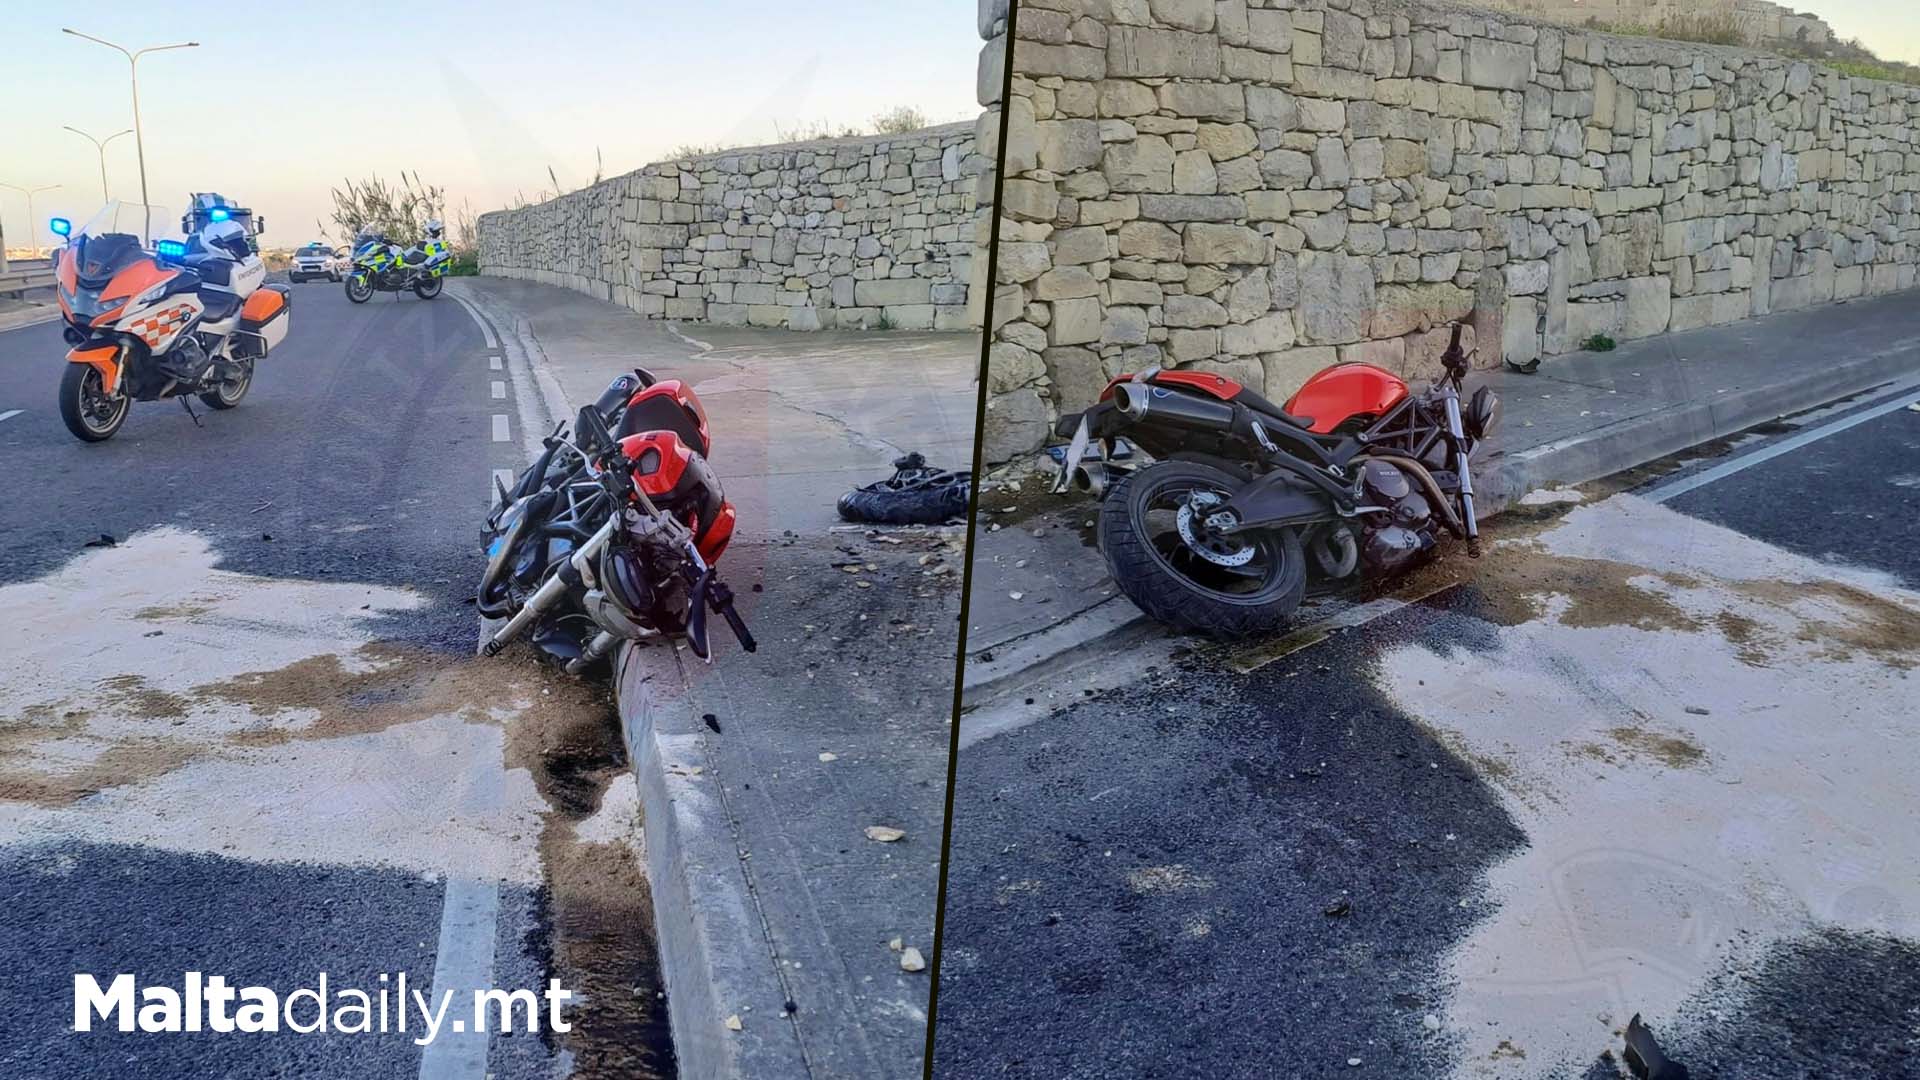 Motorcyclist Grievously Injured After Crashing Into Wall